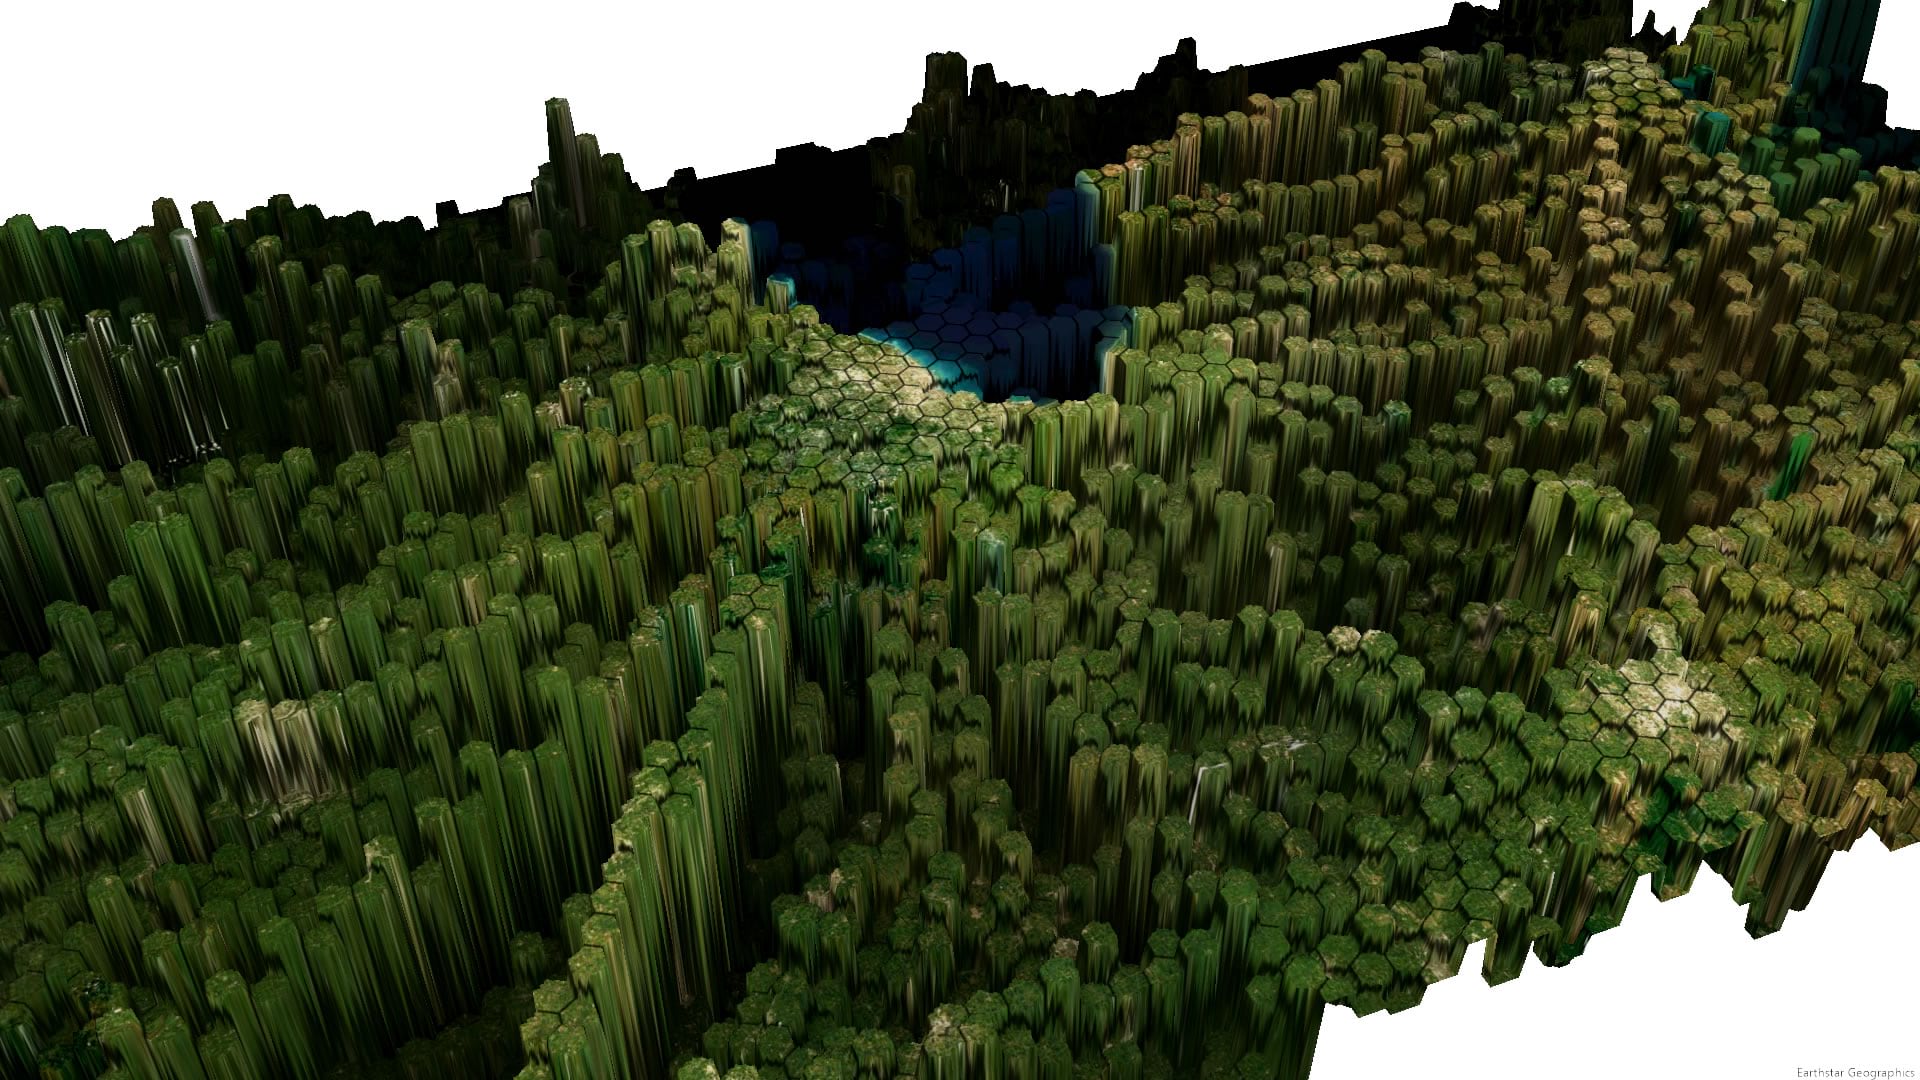 data used as an artificial terrain surface in a 3D local scene